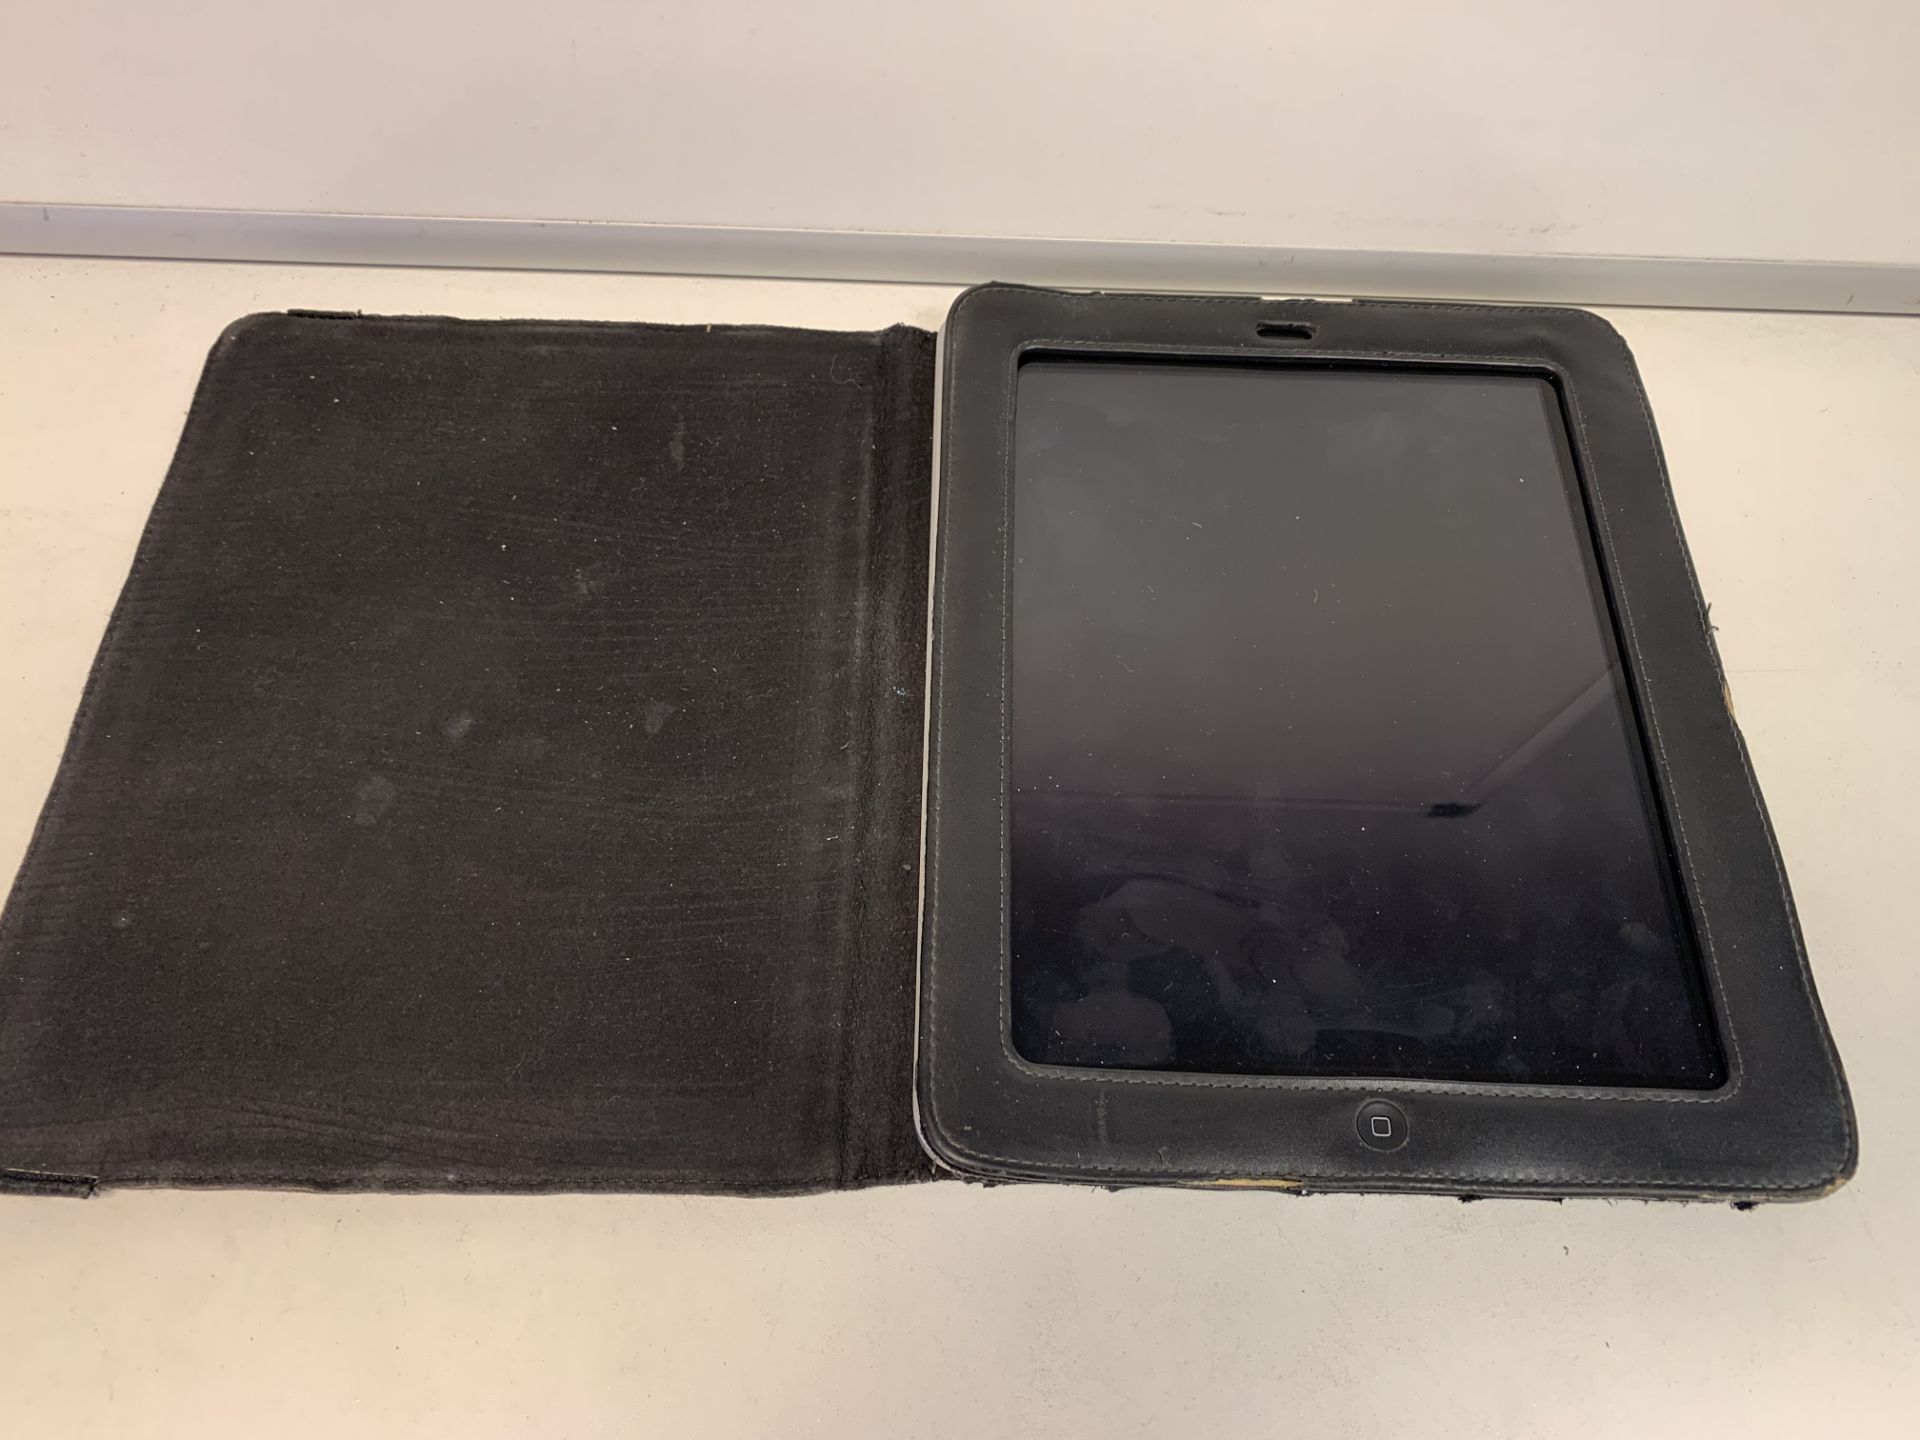 APPLE IPAD TABLET, 16GB STORAGE WITH CHARGER AND CASE